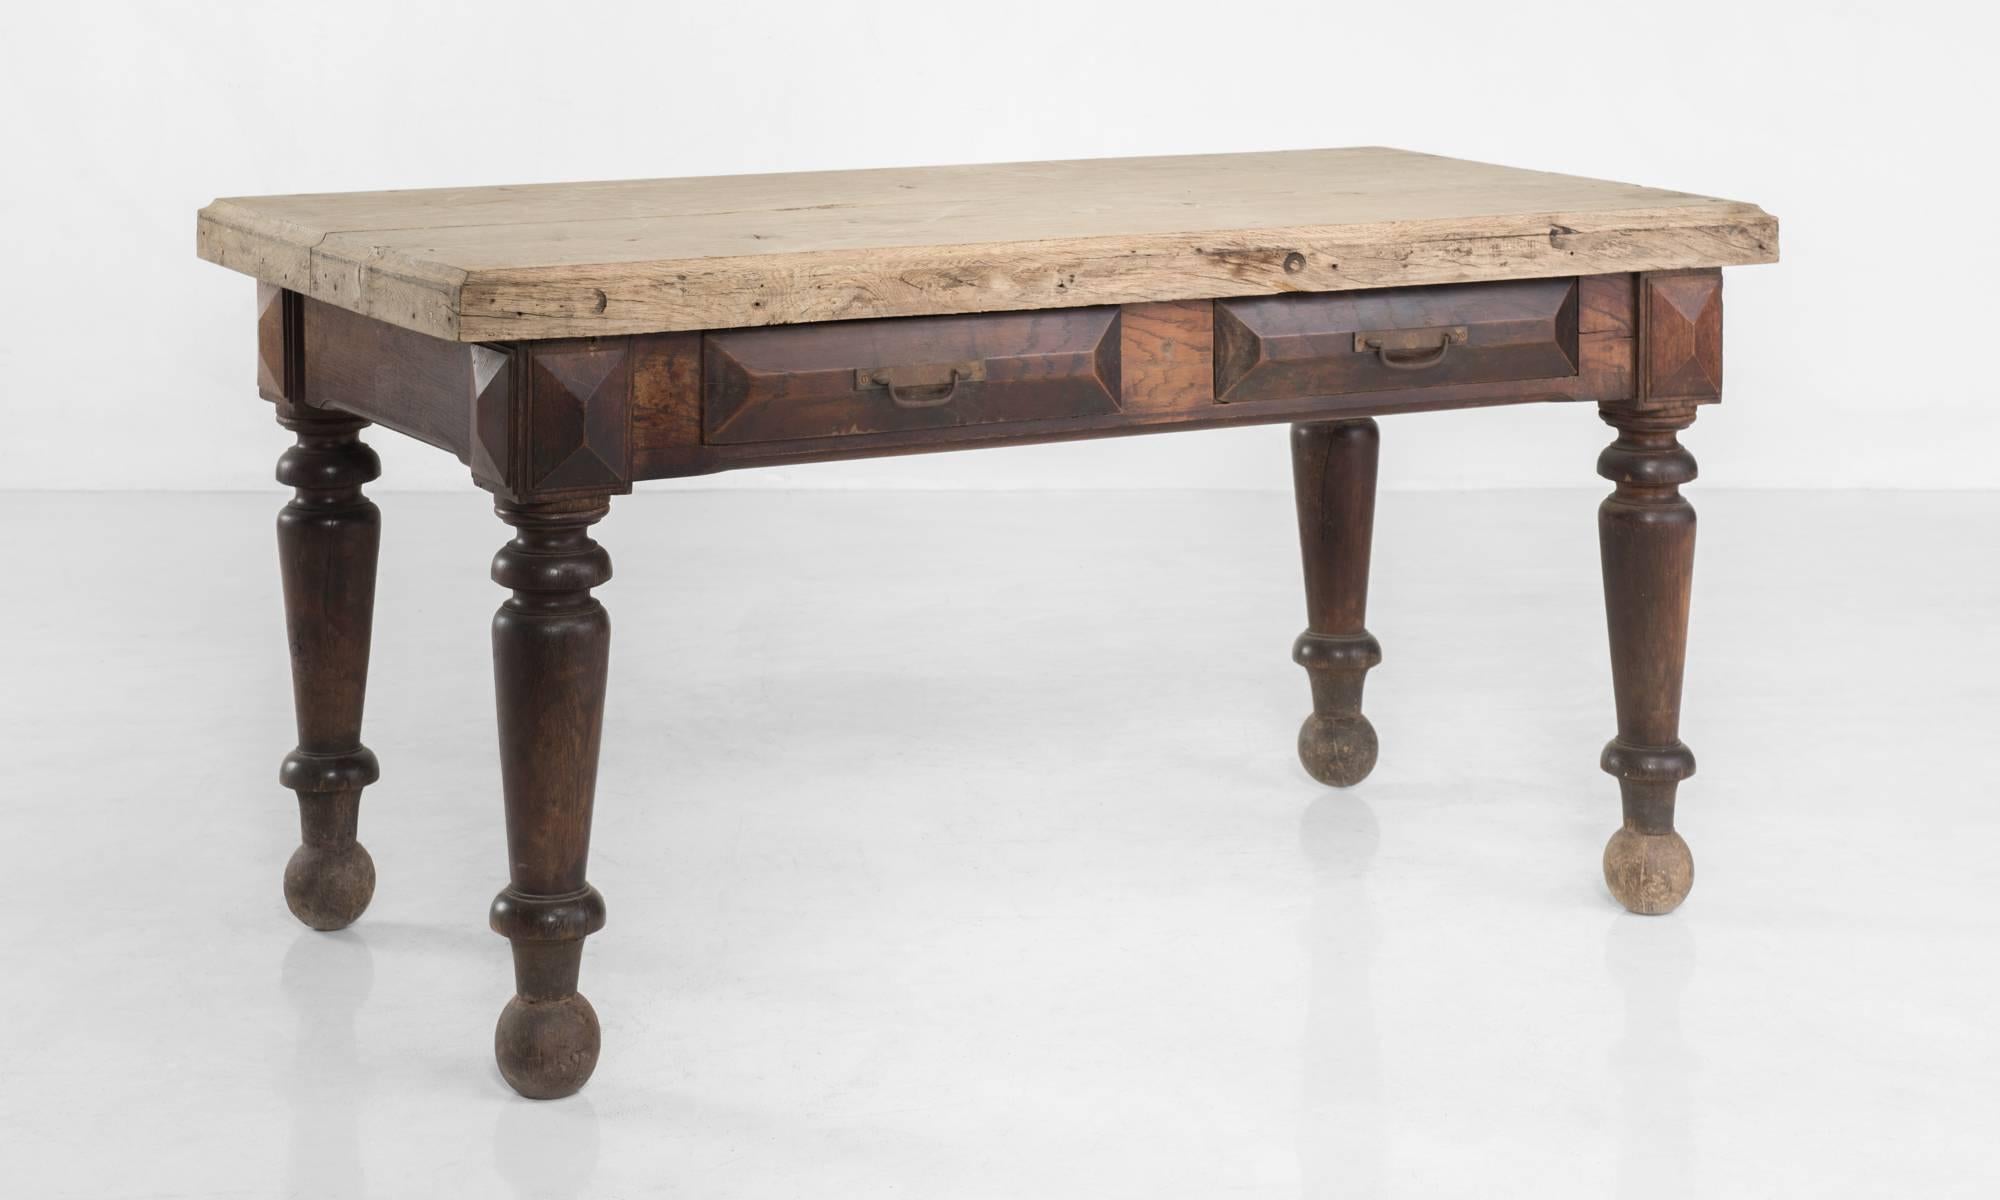 French Oak Kitchen Table with Drawers, circa 1790.

Substantial form with scrubbed oak top, two drawers, all in original finish.